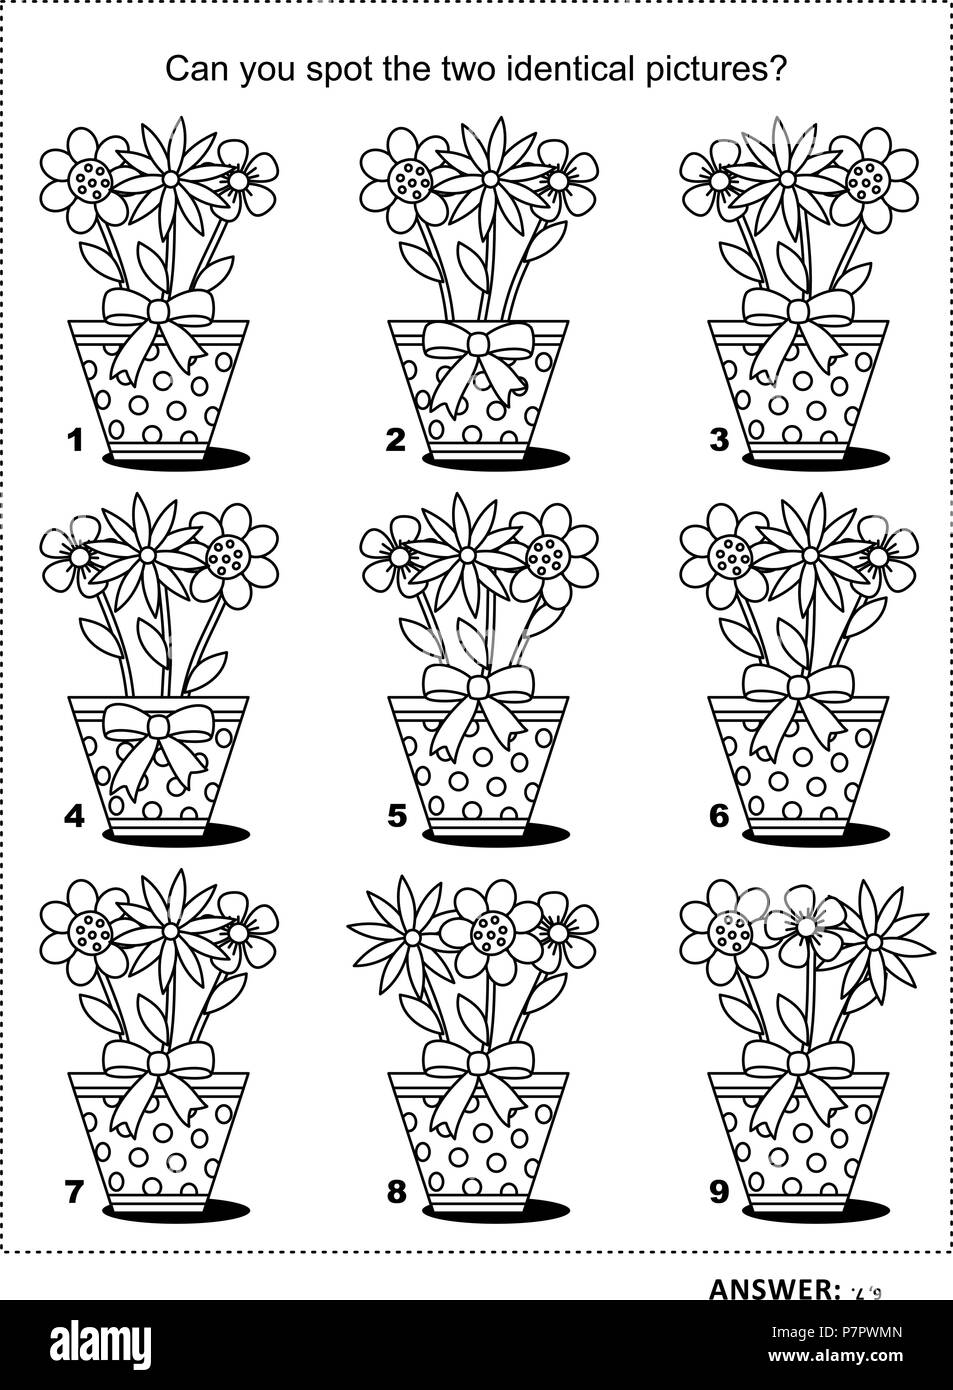 IQ training find the two identical pictures with flowers in dotted pots visual puzzle and coloring page. Answer included. Stock Vector